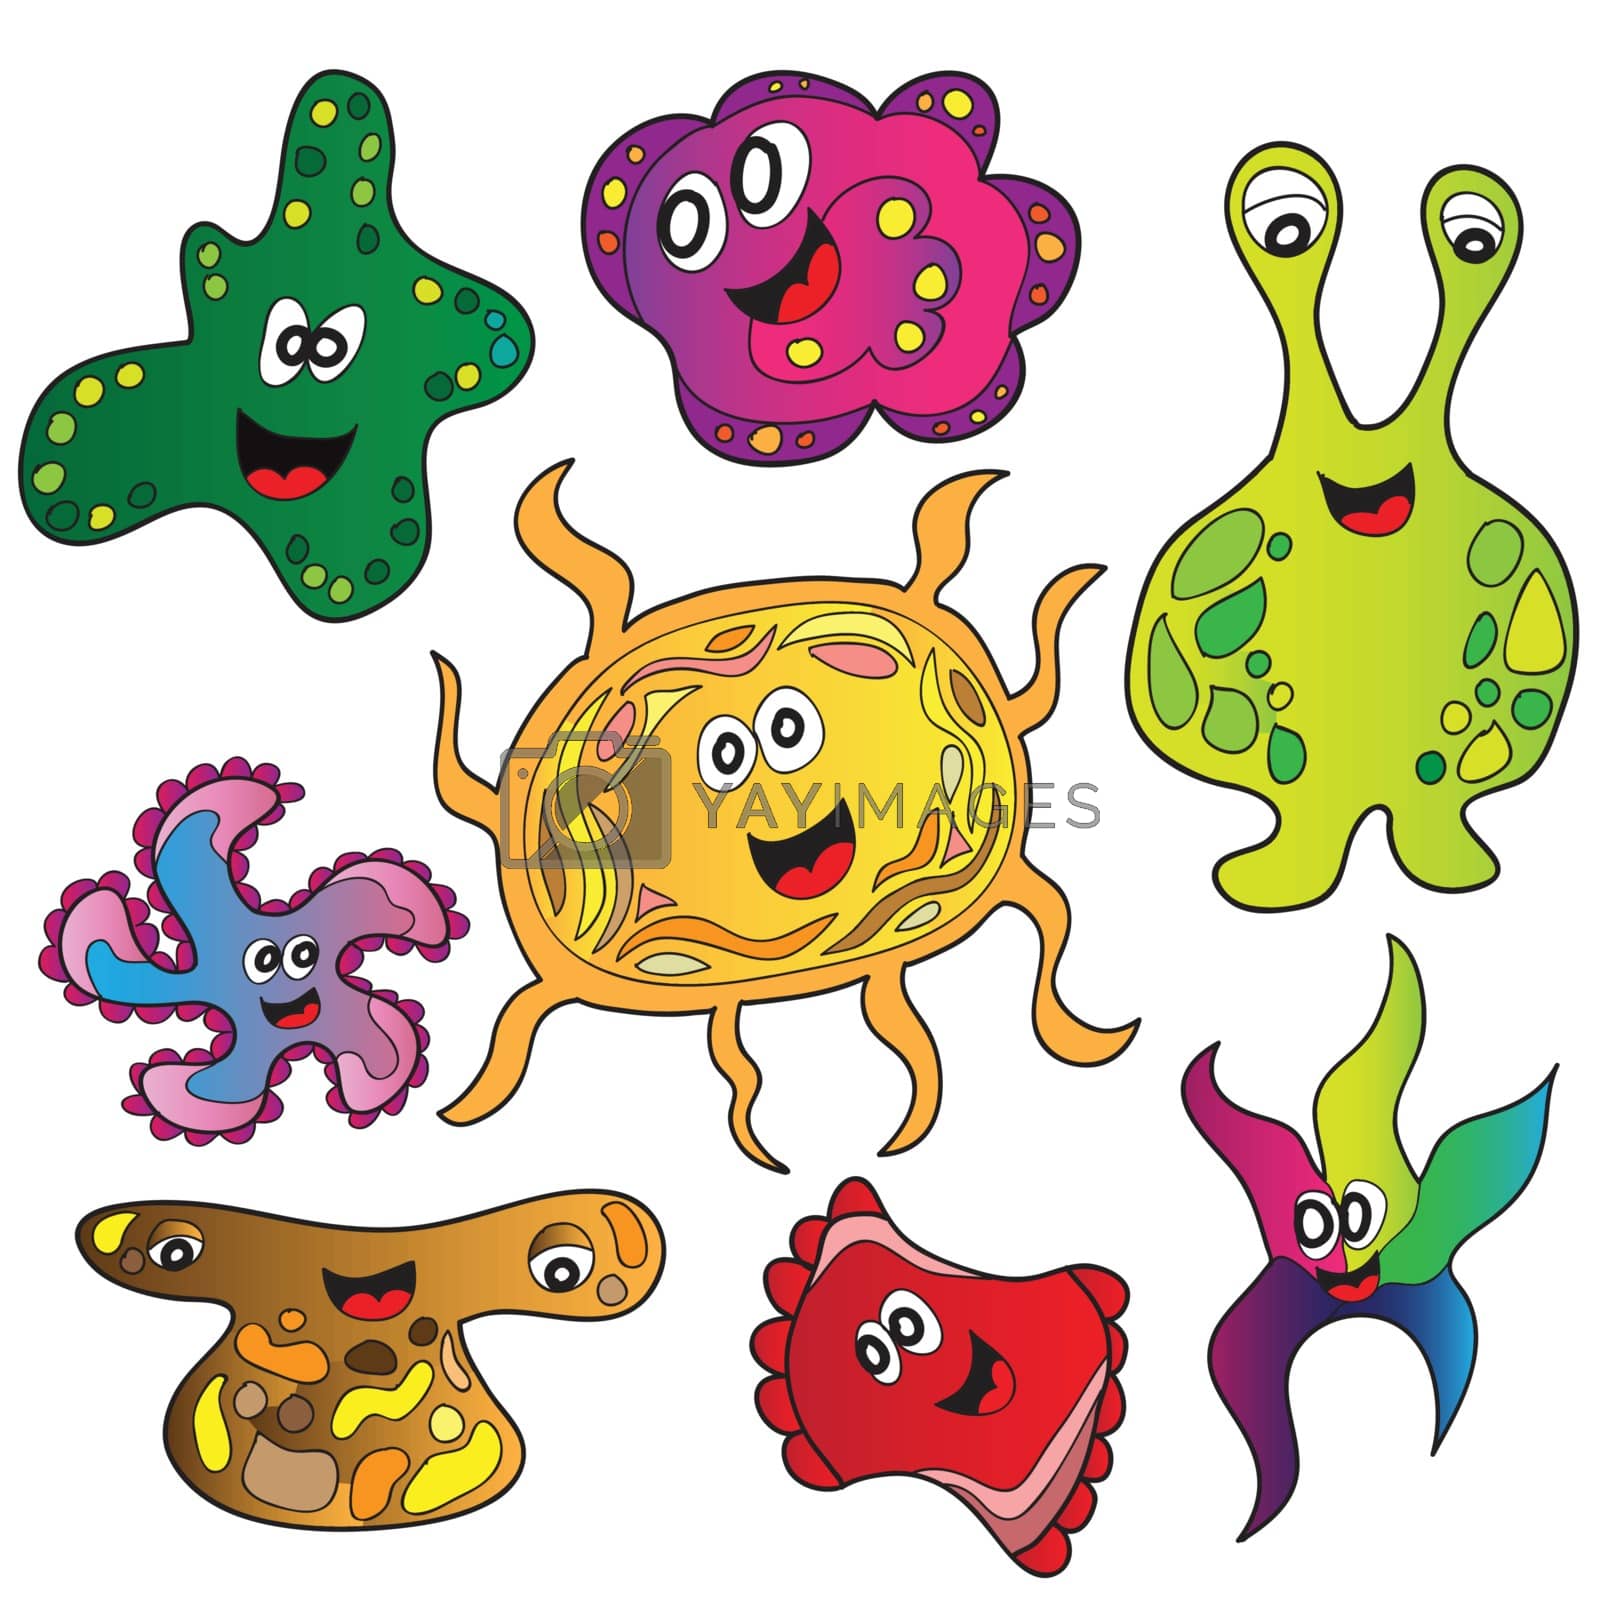 Royalty free image of Cartoon cute monsters by natali_brill